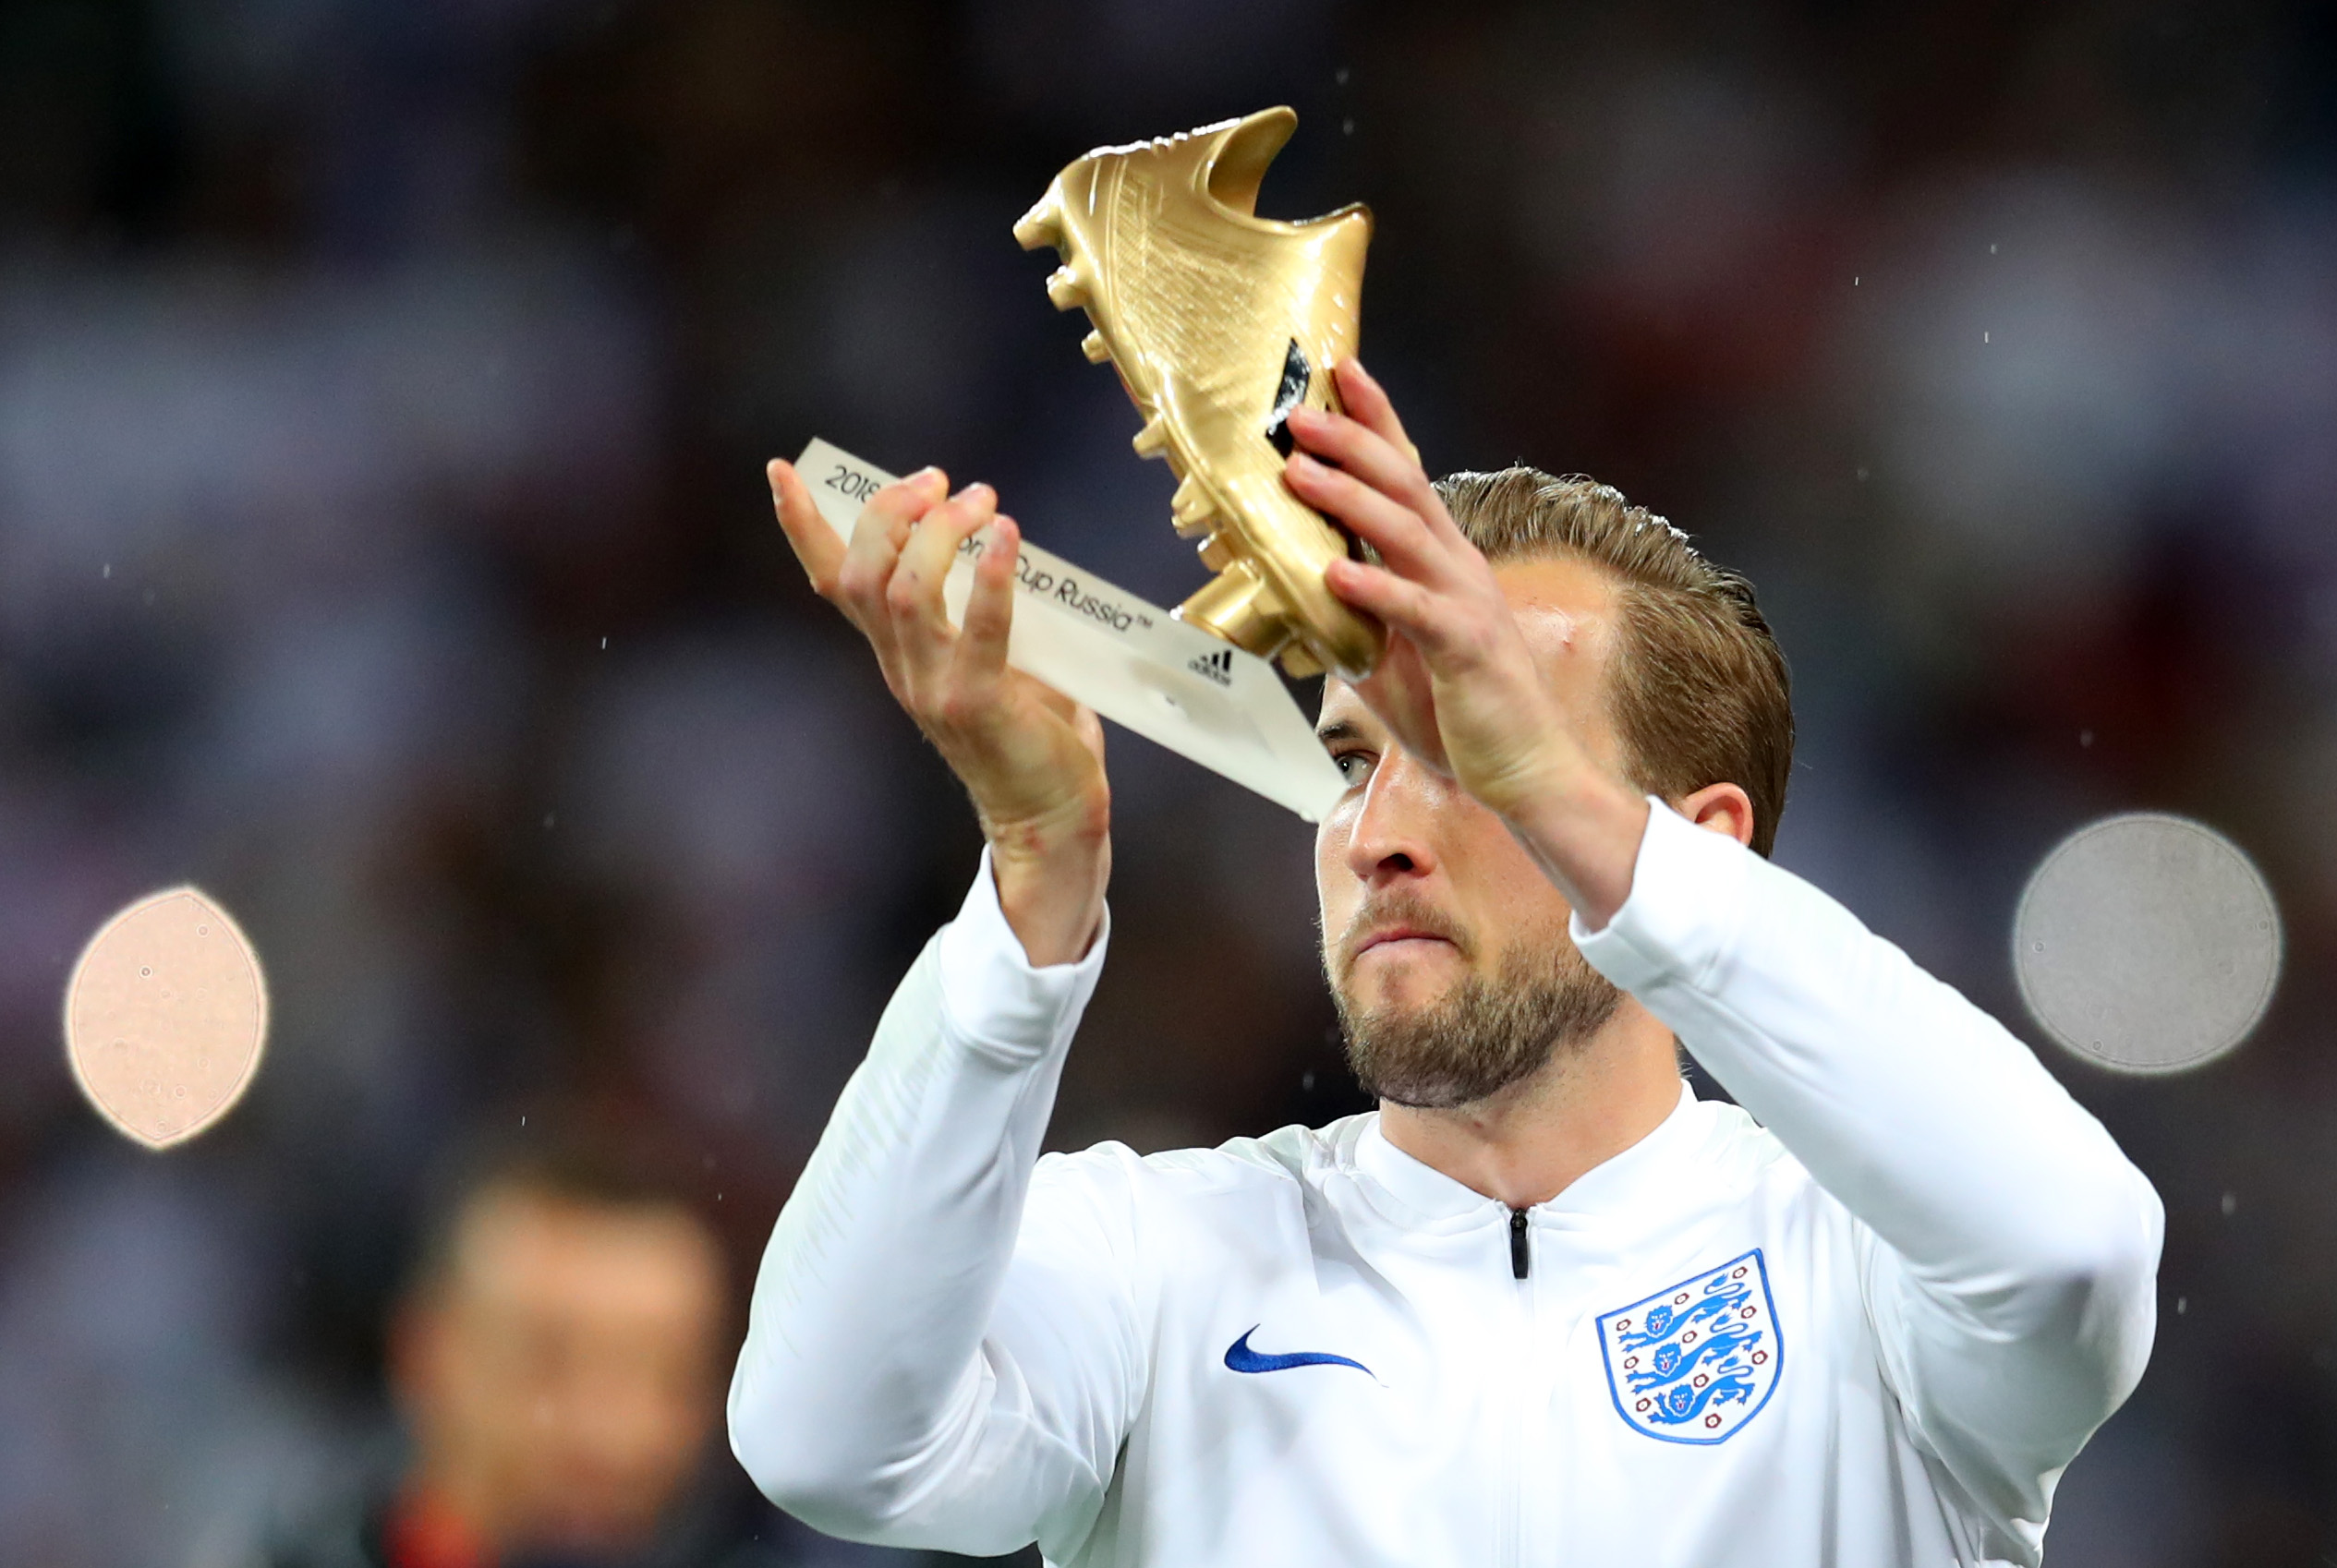 LONDON, ENGLAND - SEPTEMBER 08: Harry Kane of England with the World Cup 2018 Golden Boot Award the UEFA Nations League A group four match between England and Spain at Wembley Stadium on September 8, 2018 in London, United Kingdom. (Photo by Catherine Ivill/Getty Images)